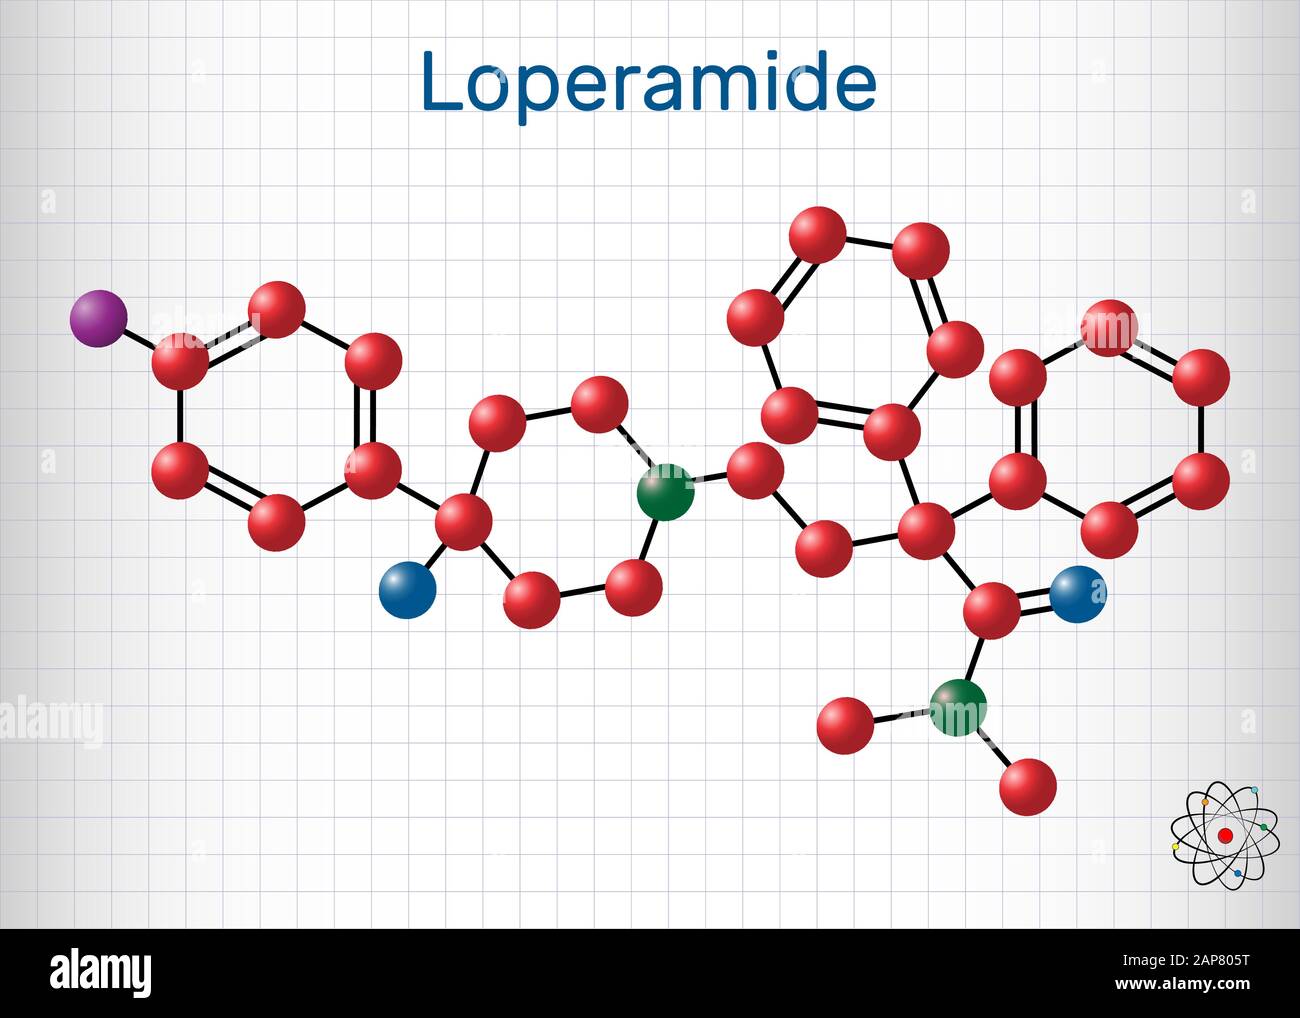 Loperamide, long-acting synthetic antidiarrheal molecule. Structural chemical formula and molecule model. Sheet of paper in a cage. Vector illustratio Stock Vector